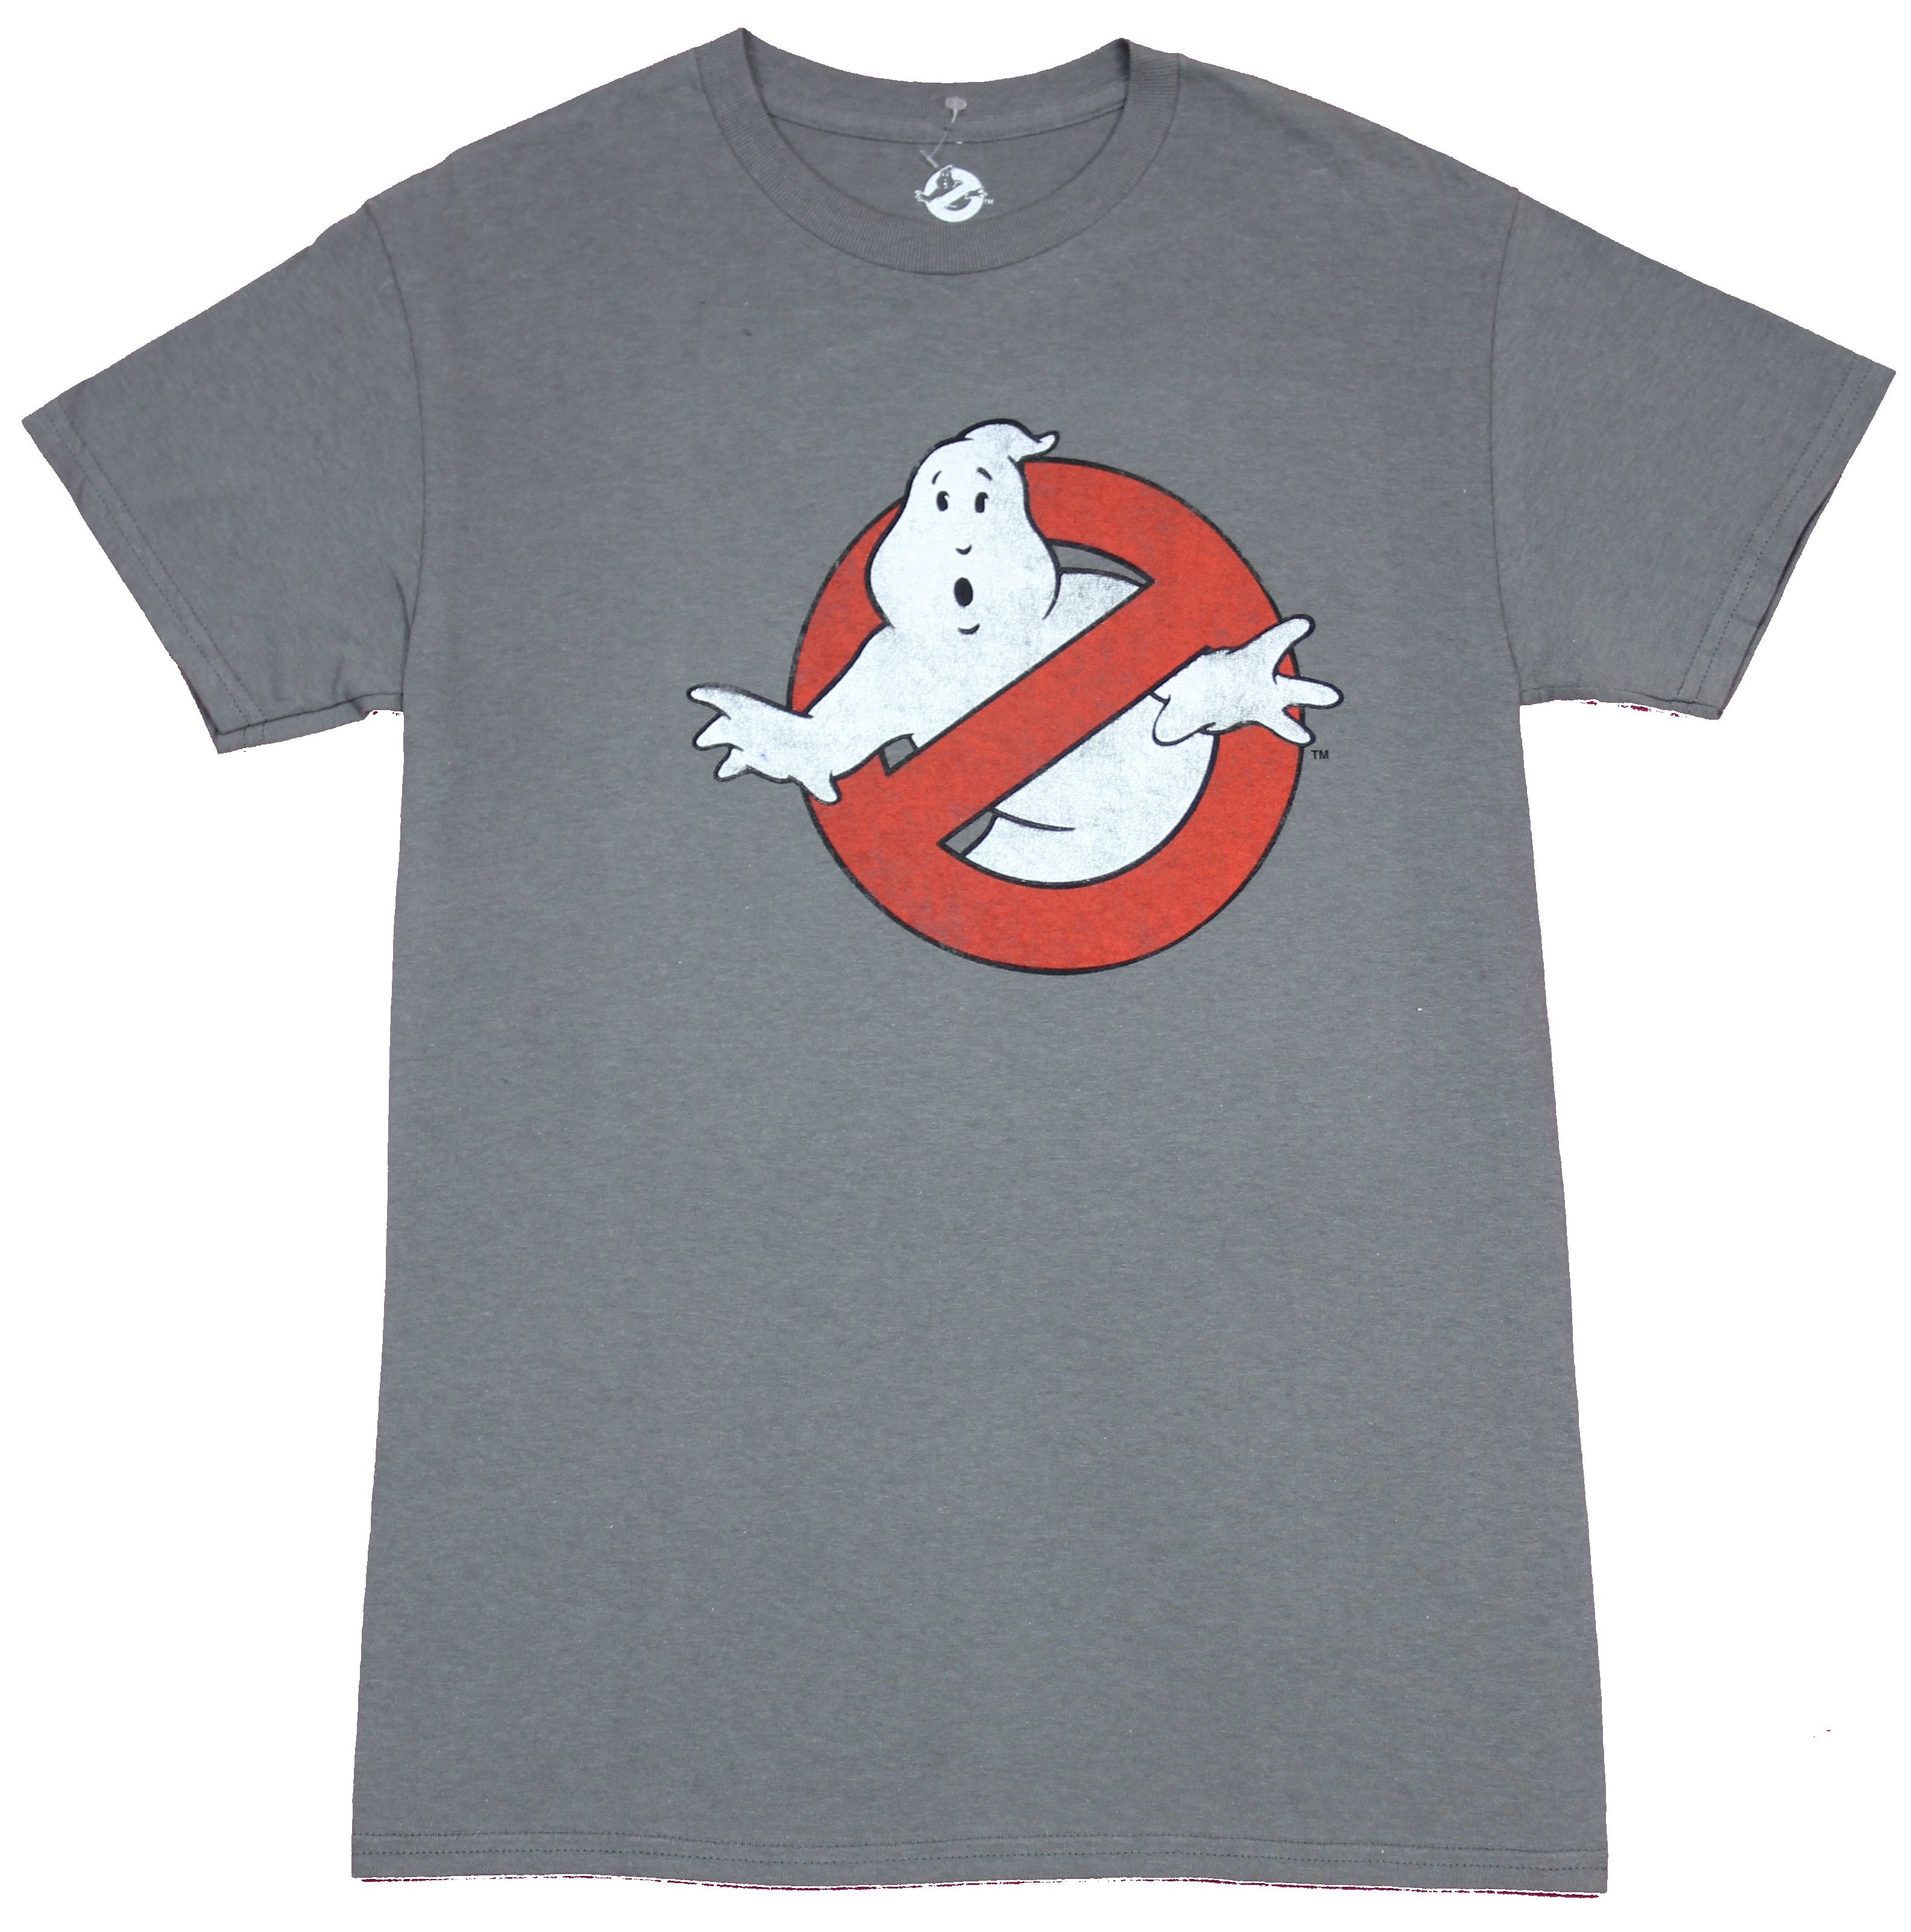 Ghostbusters Mens T-Shirt - Classic No Ghost Logo Image (Small ...